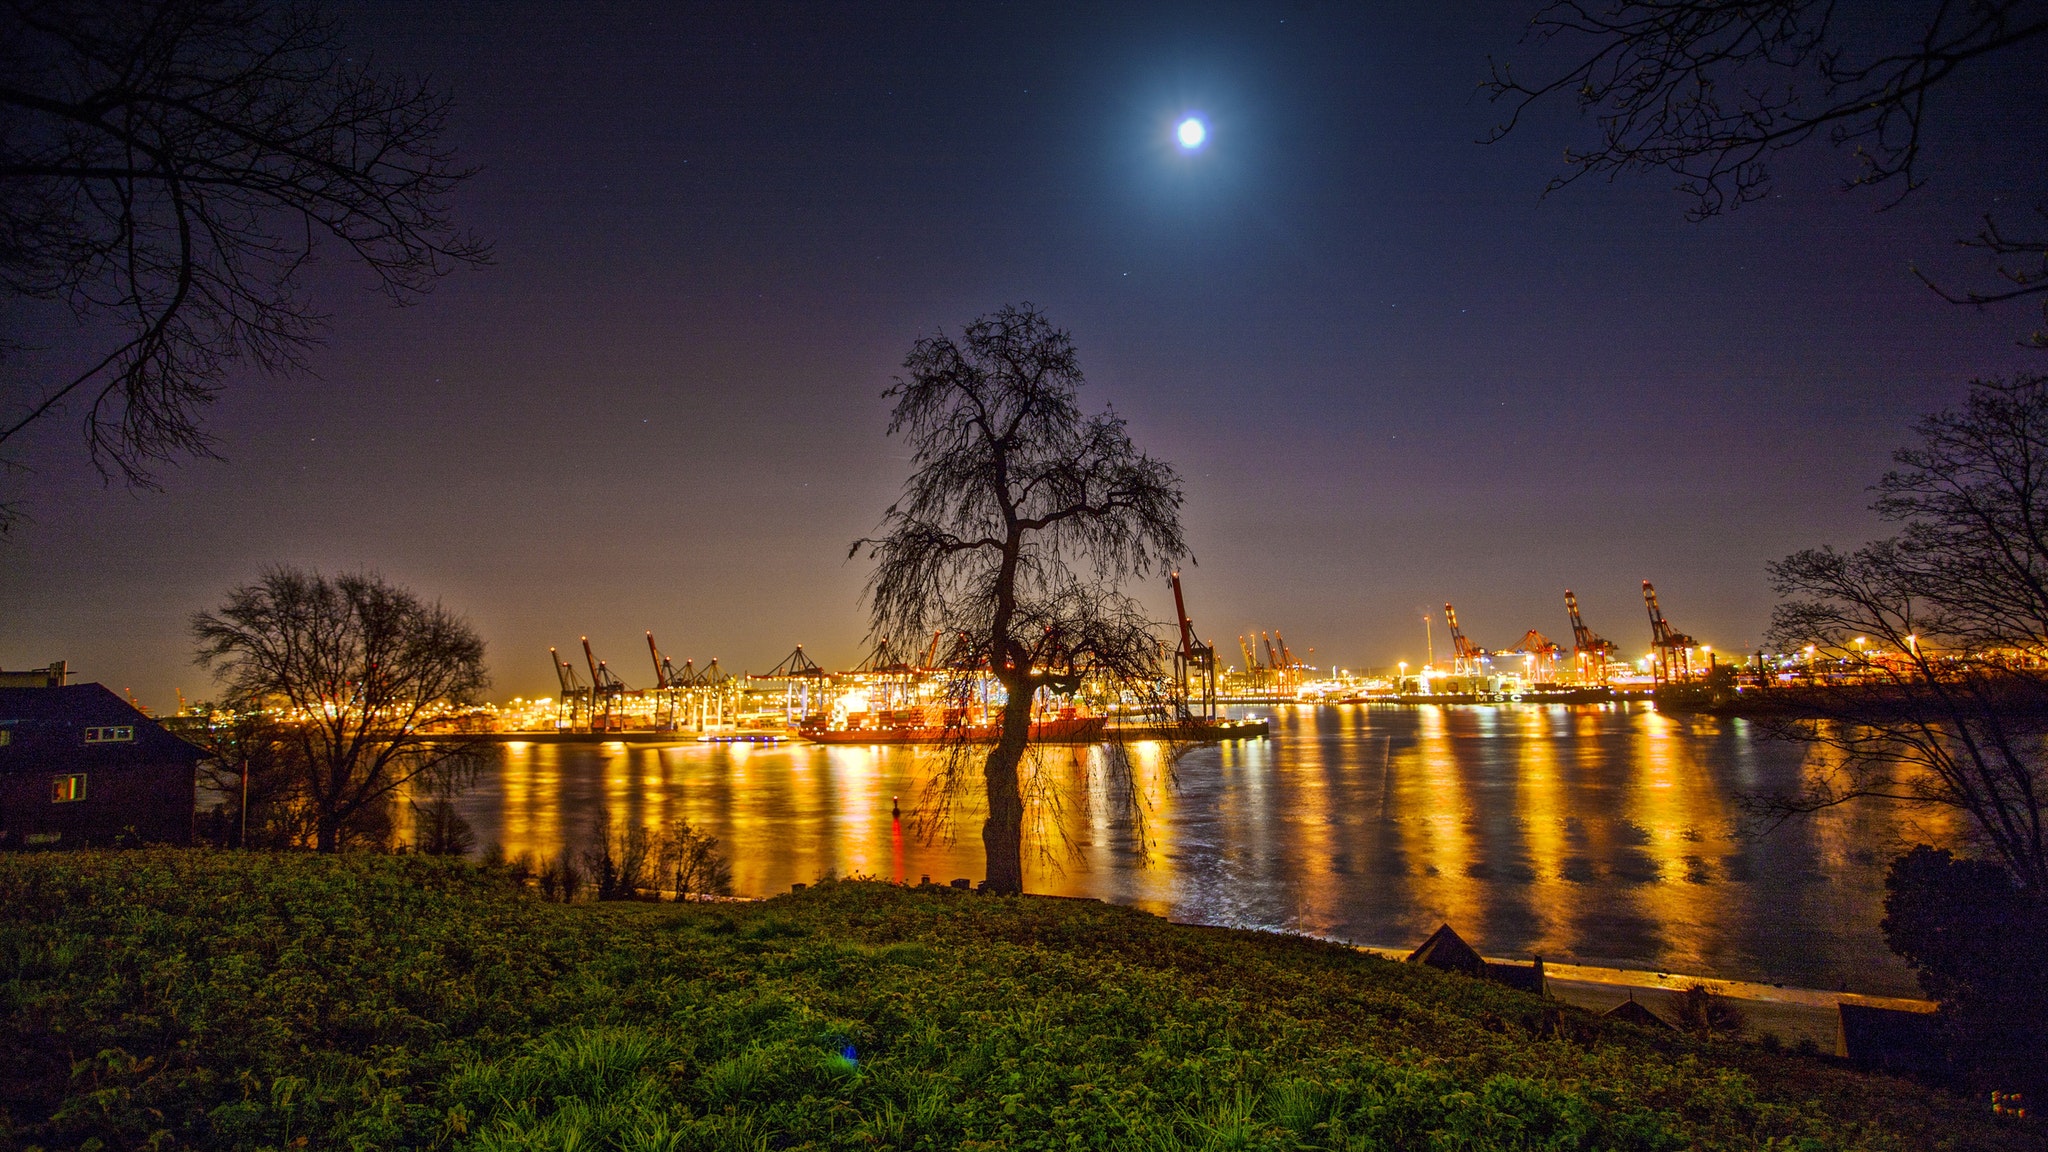 General 2048x1152 city sky Moon grass lights harbor ports outdoors river water night